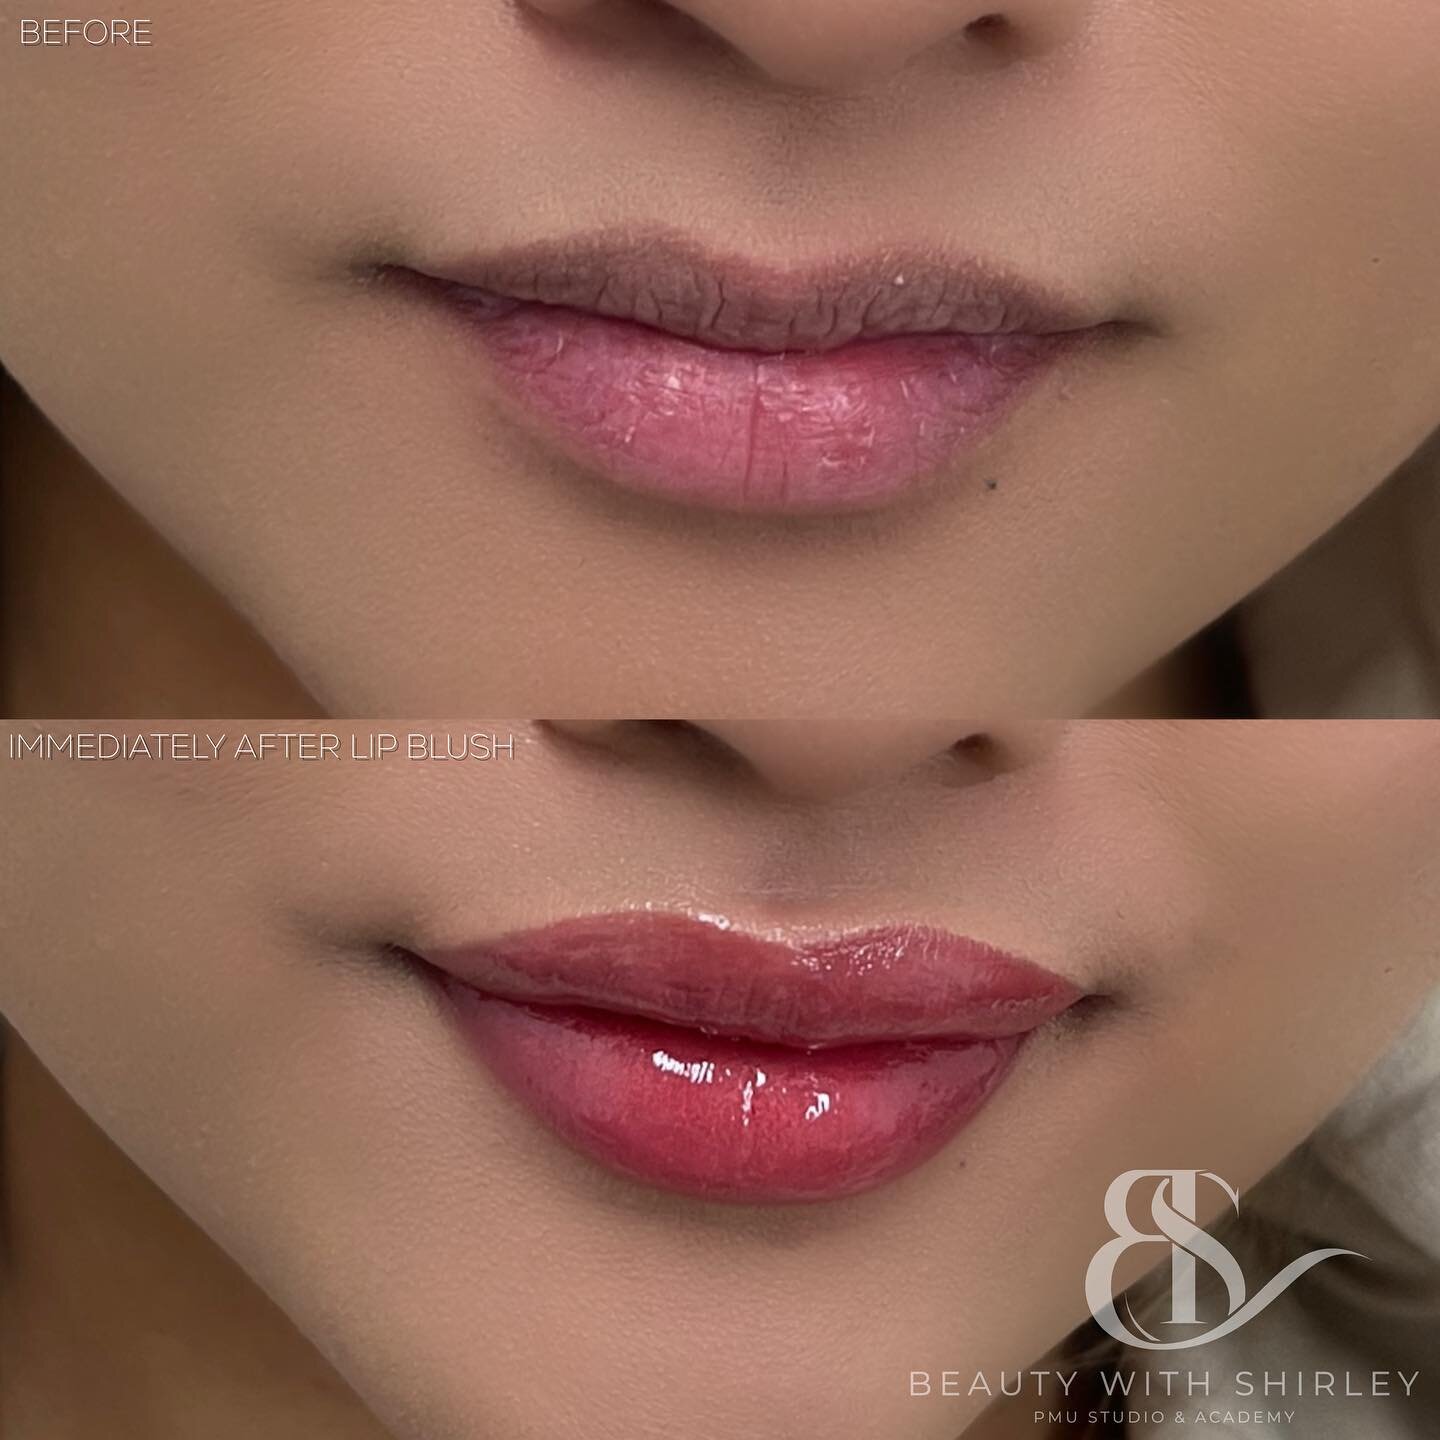 She asked for a more natural result so we opted for something close to her natural lip colour. Lip blush can give your lips a natural tint so they can look more even overall and healthier.

However it is so important to please follow pre care before 